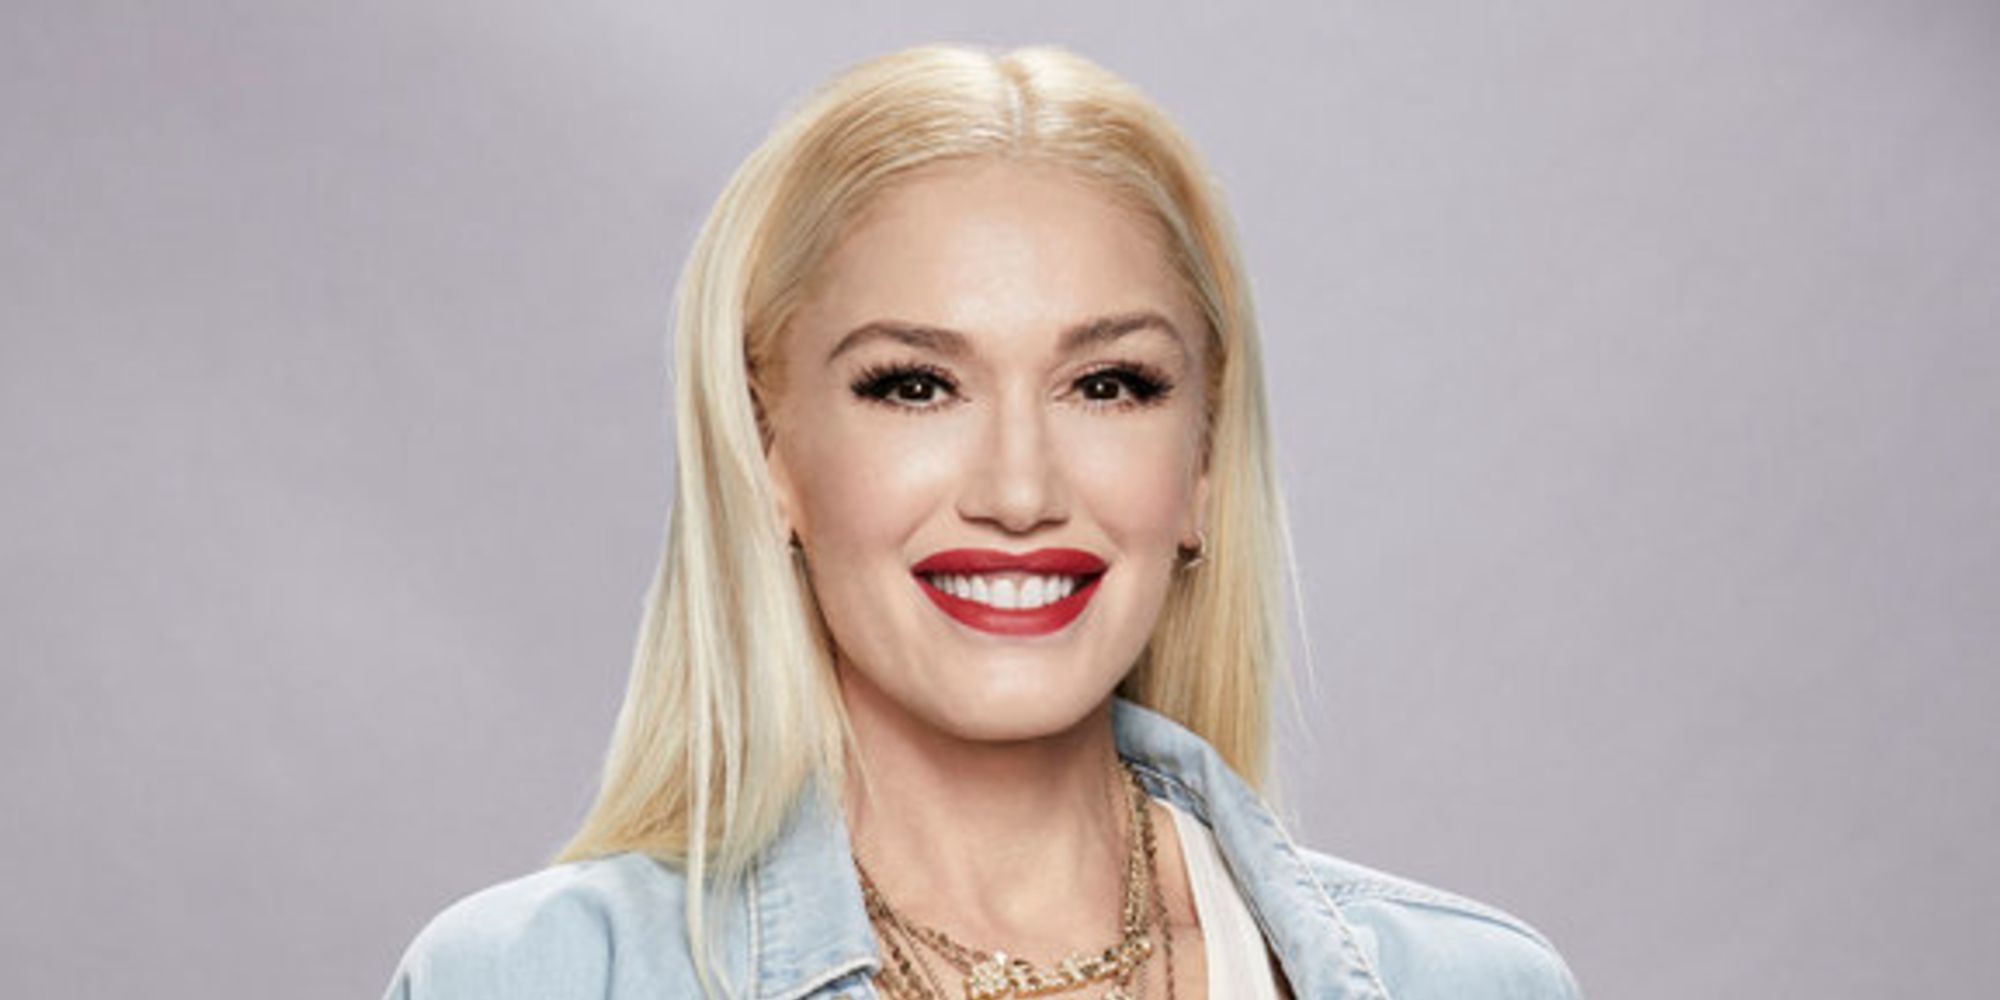 The Voice How Much Money Gwen Stefani Made On The Show